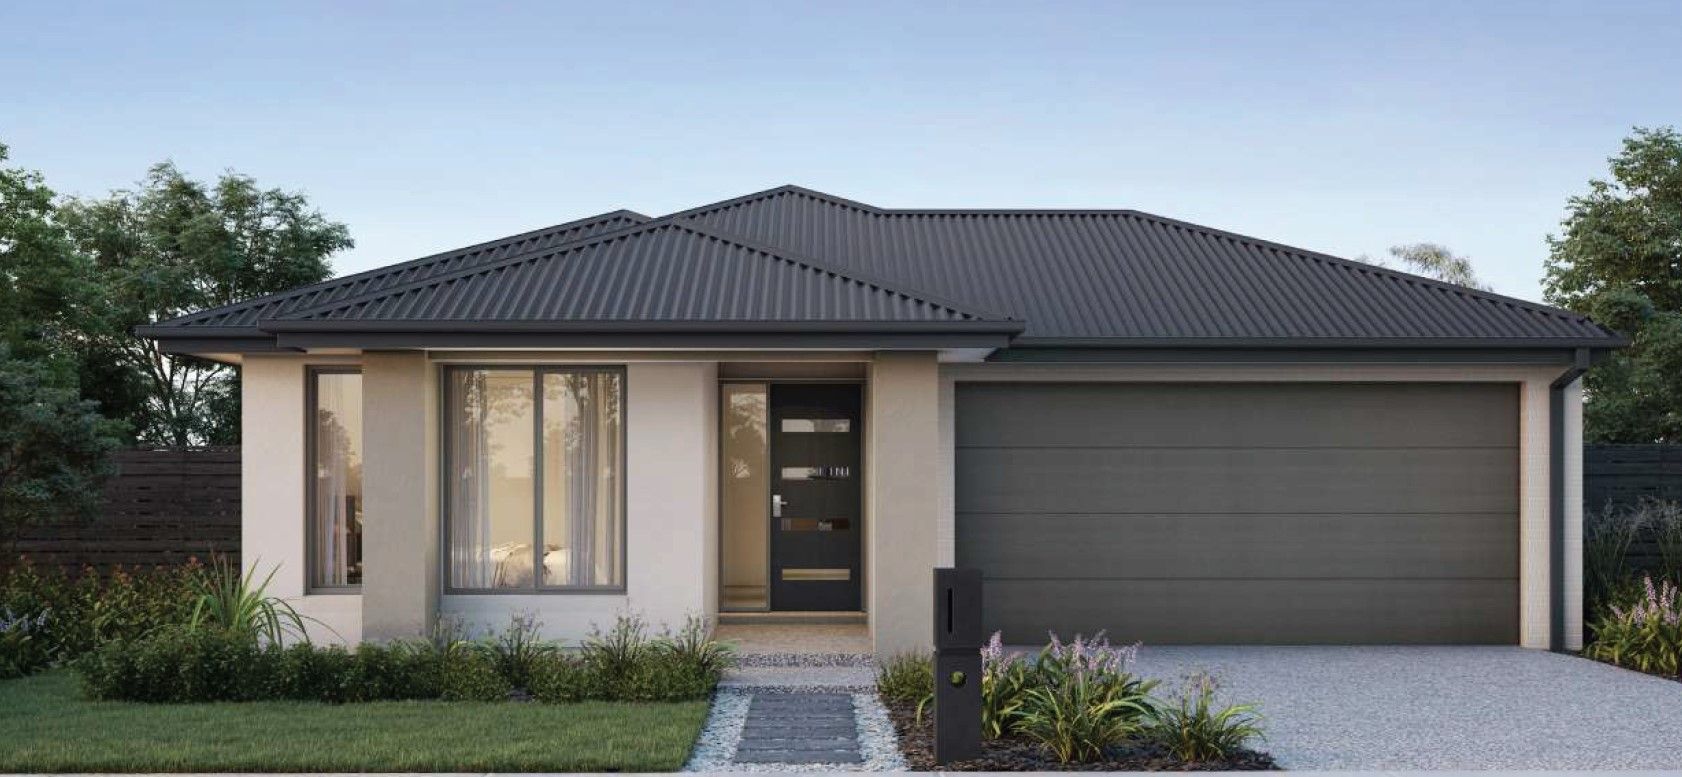 LOT 224 Abacot Street, Clyde North VIC 3978, Image 0